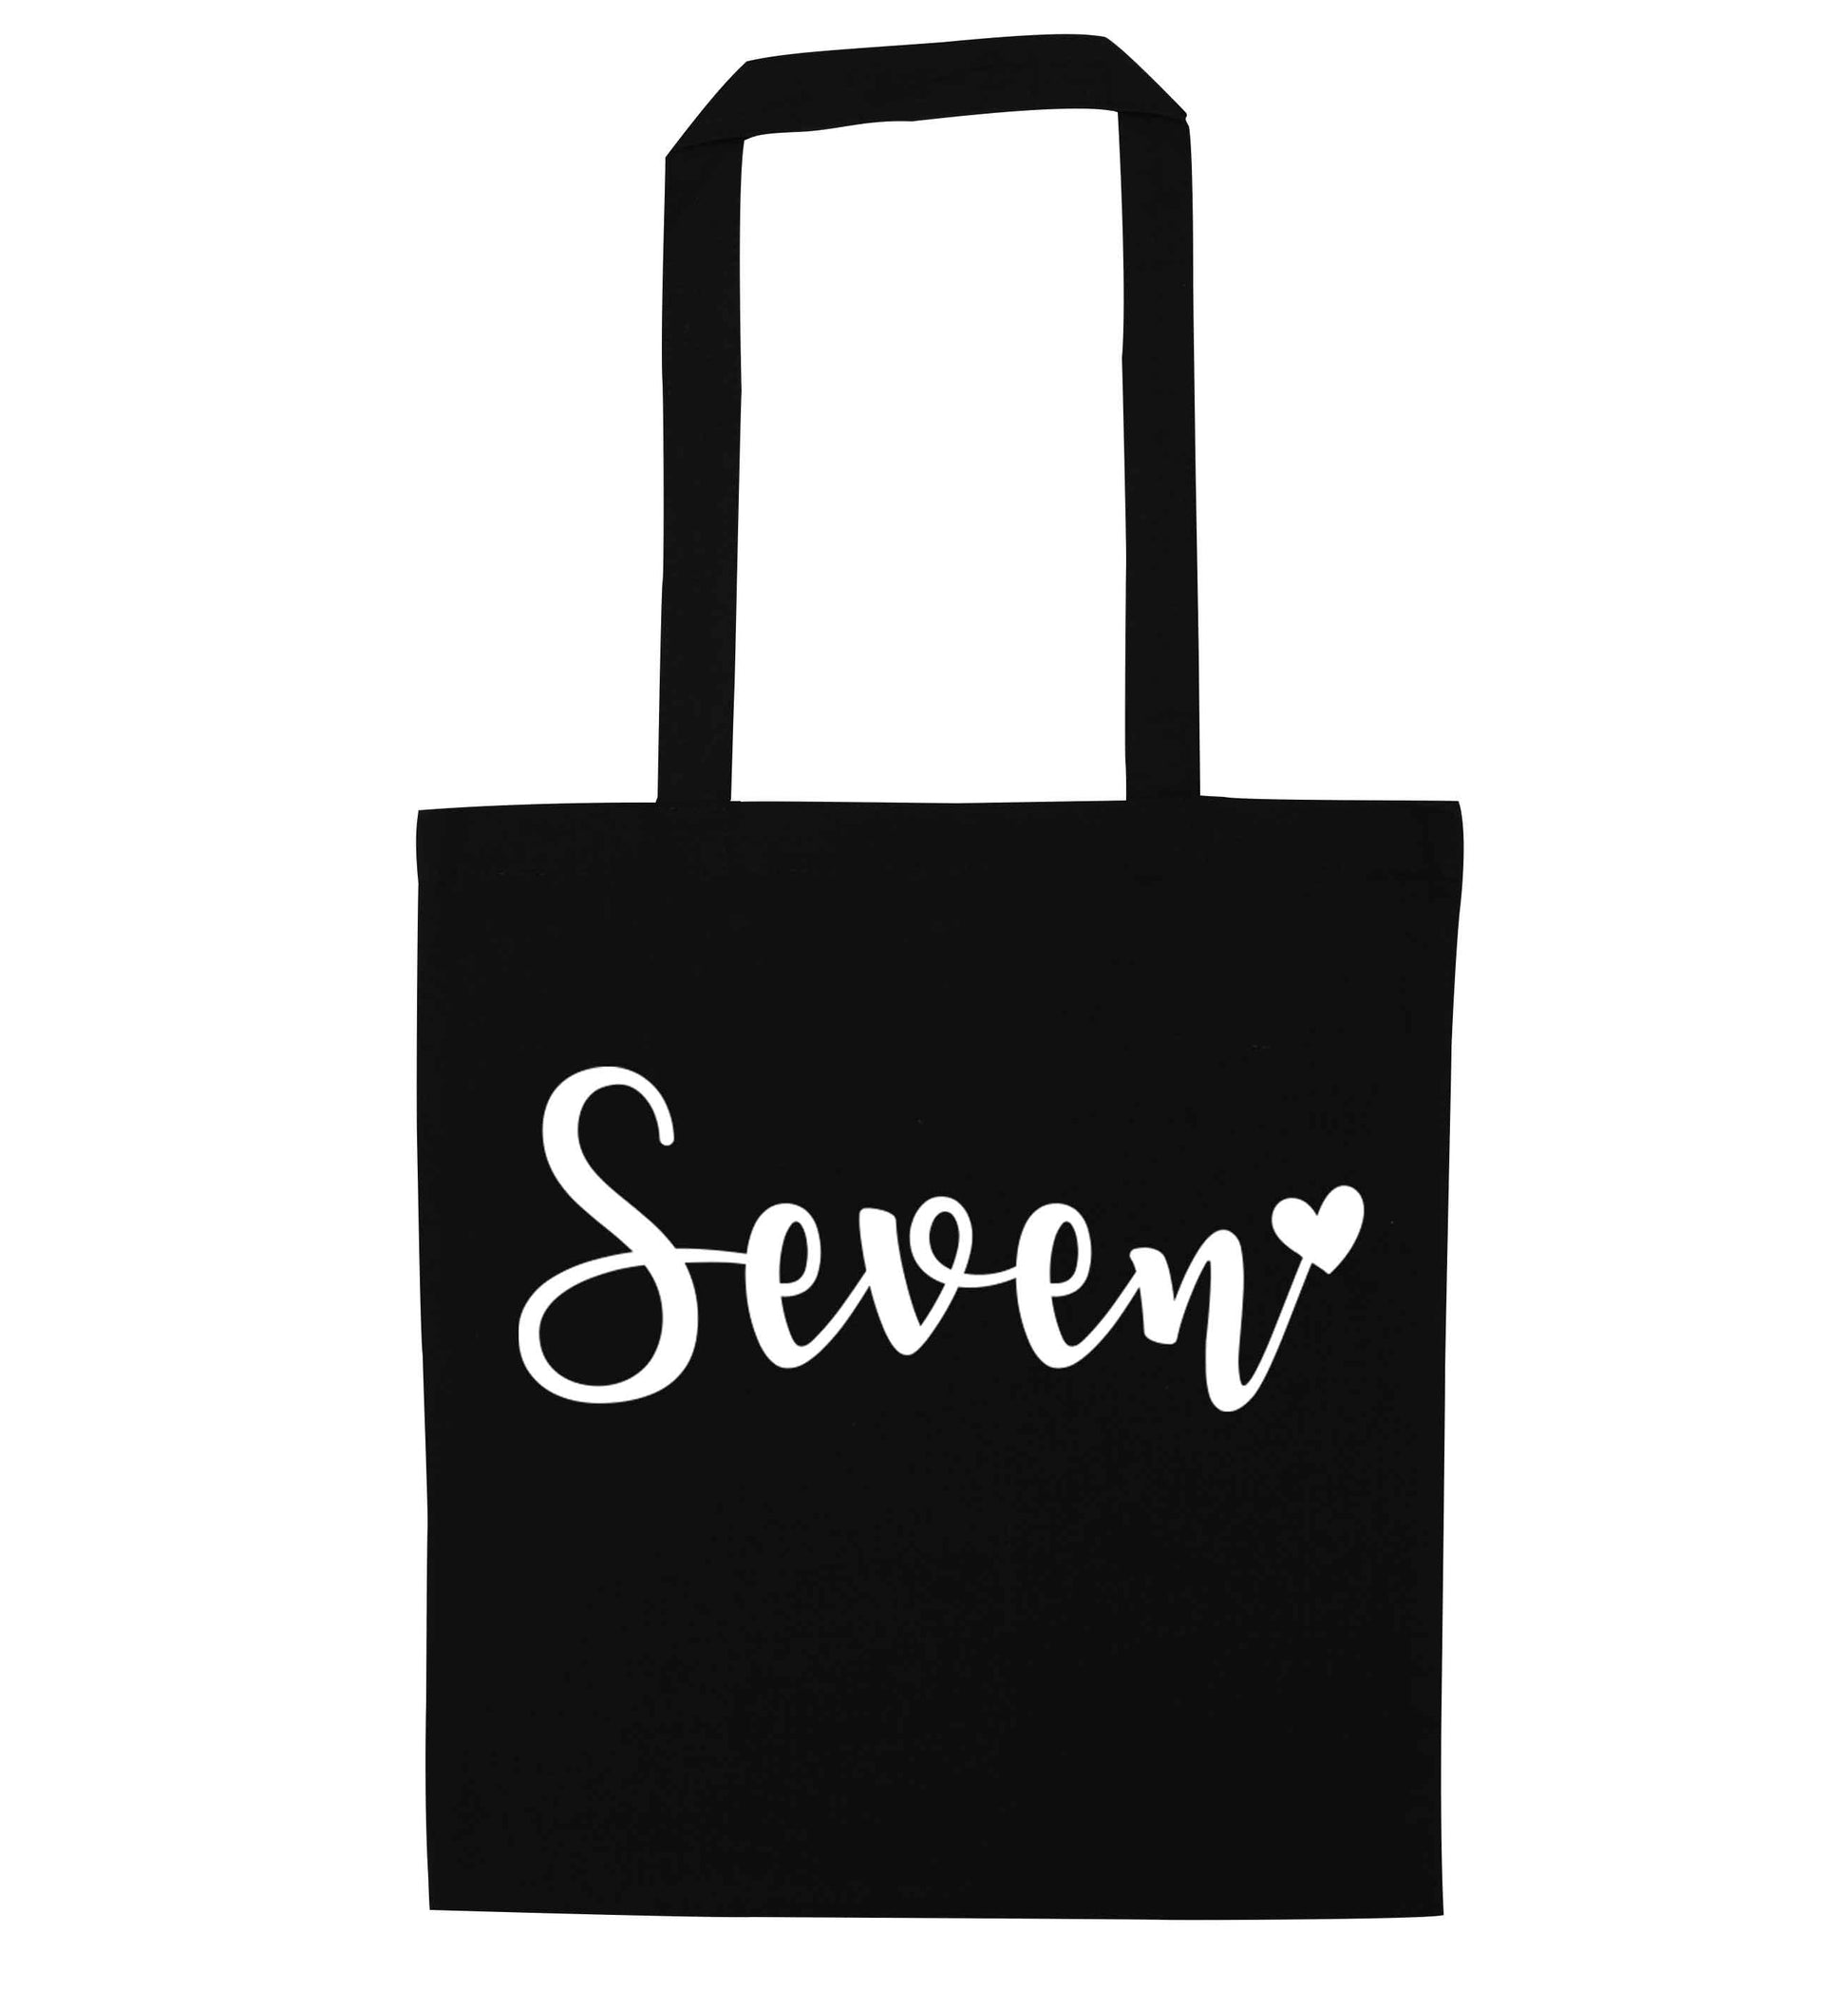 Seven and heart black tote bag